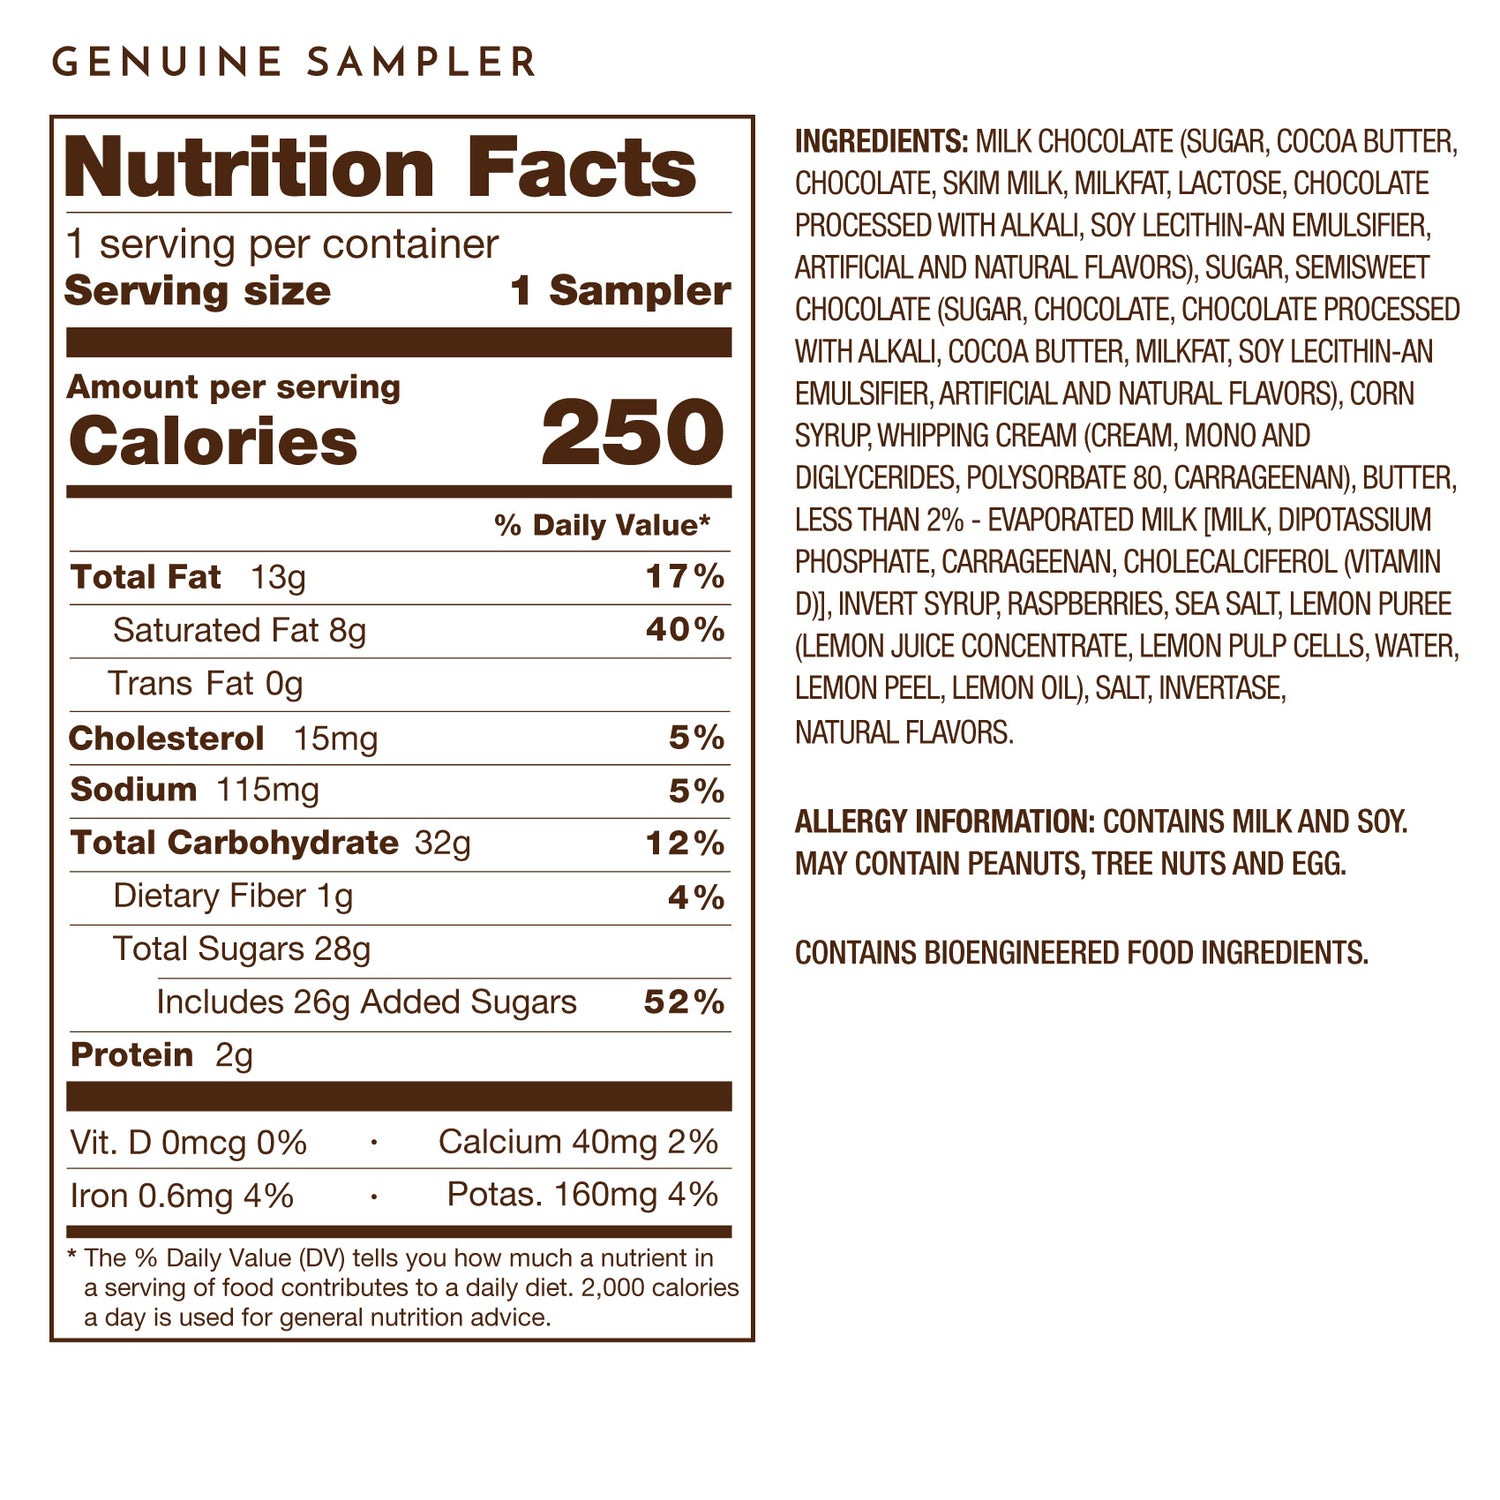 Ethel M Genuine Sampler 4pc Collection - Nutrition Facts. Please Call 1-800-438-4356 for more information.